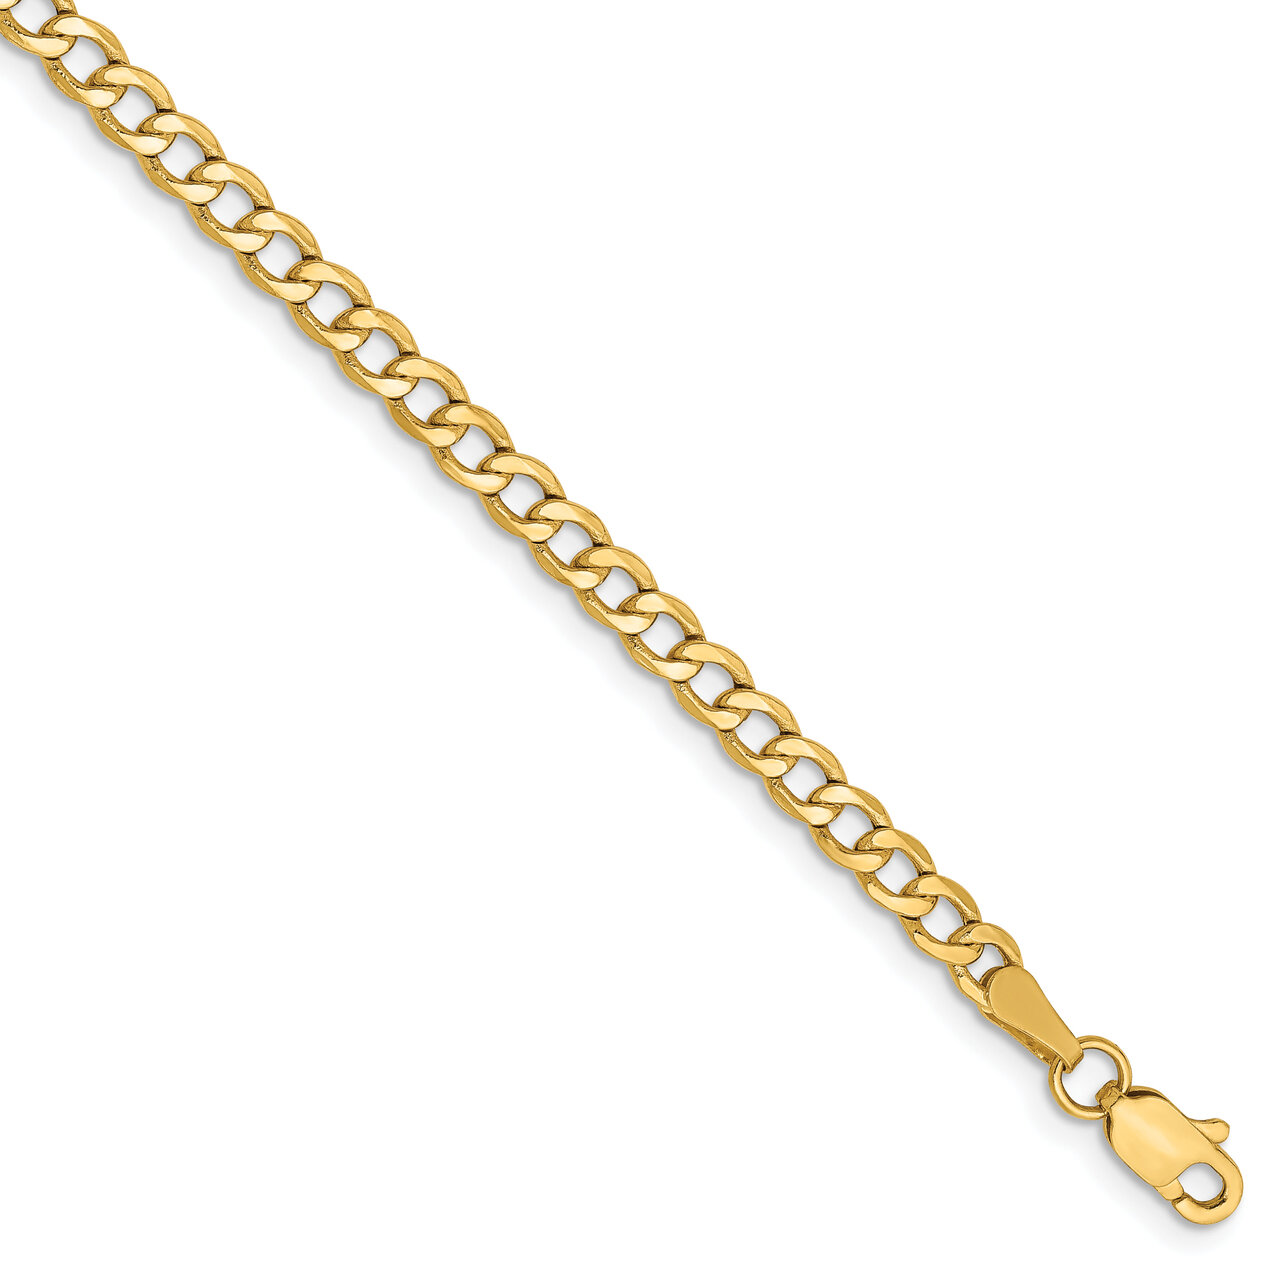 10 Inch 3.35mm Semi-Solid Curb Link Chain 14k Yellow Gold BC106-10